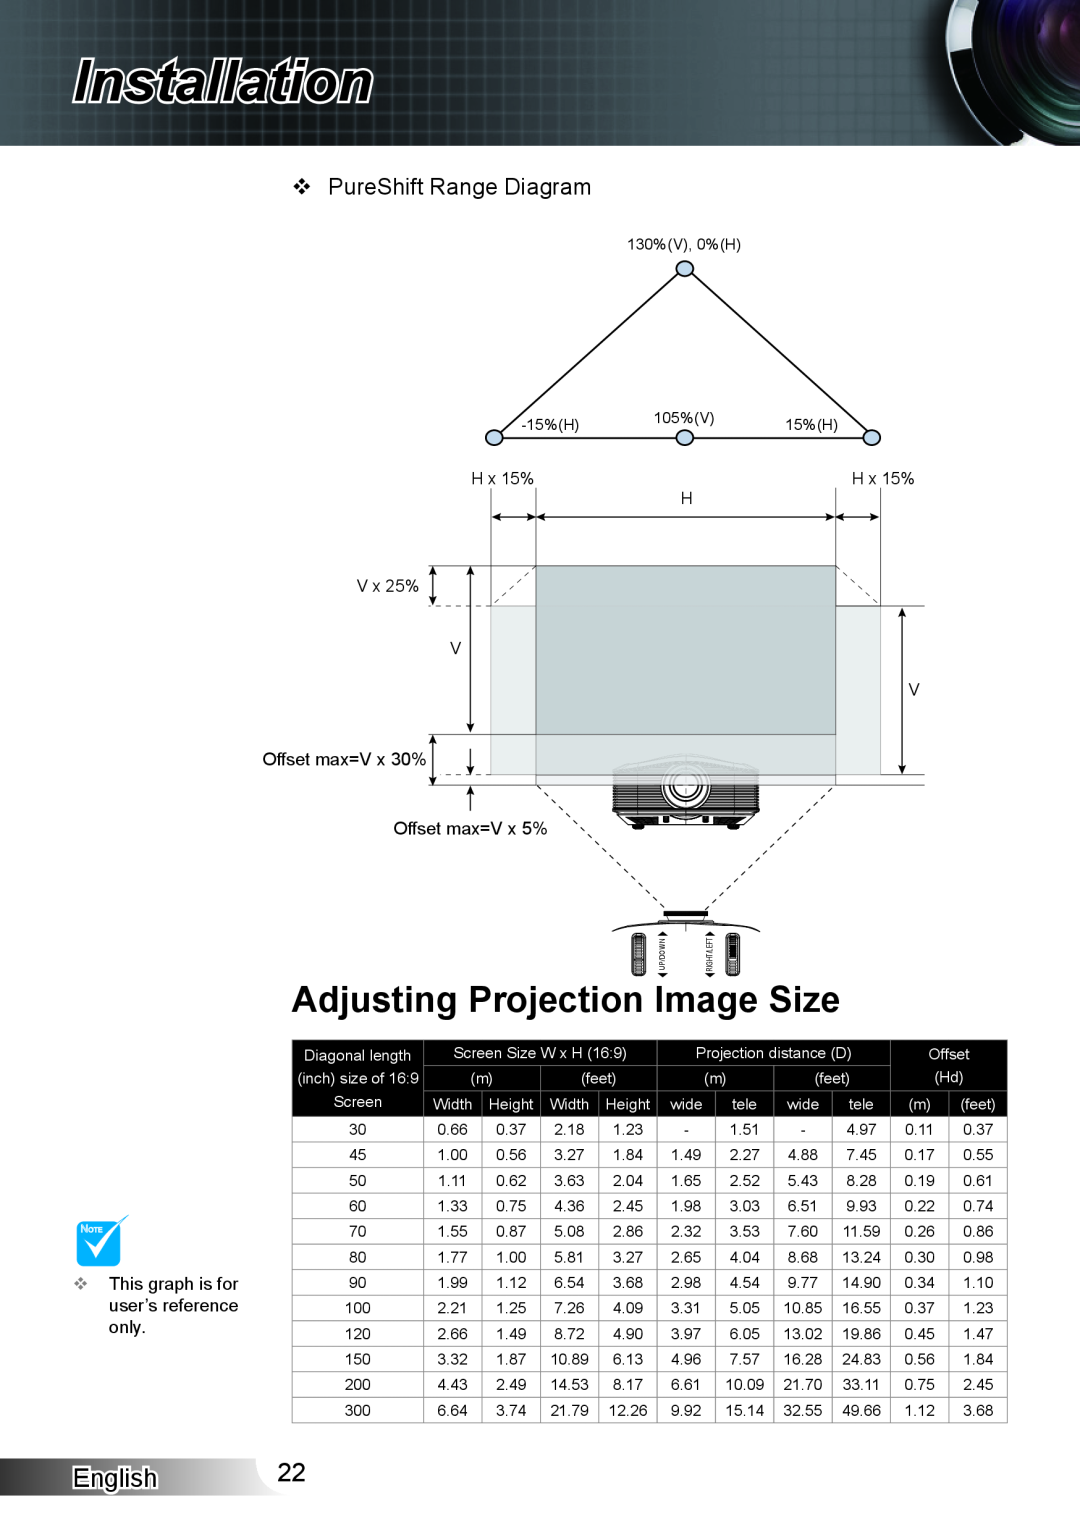 Optoma Technology XX152 N manual Installation, Adjusting Projection Image Size, English, H x 15% 